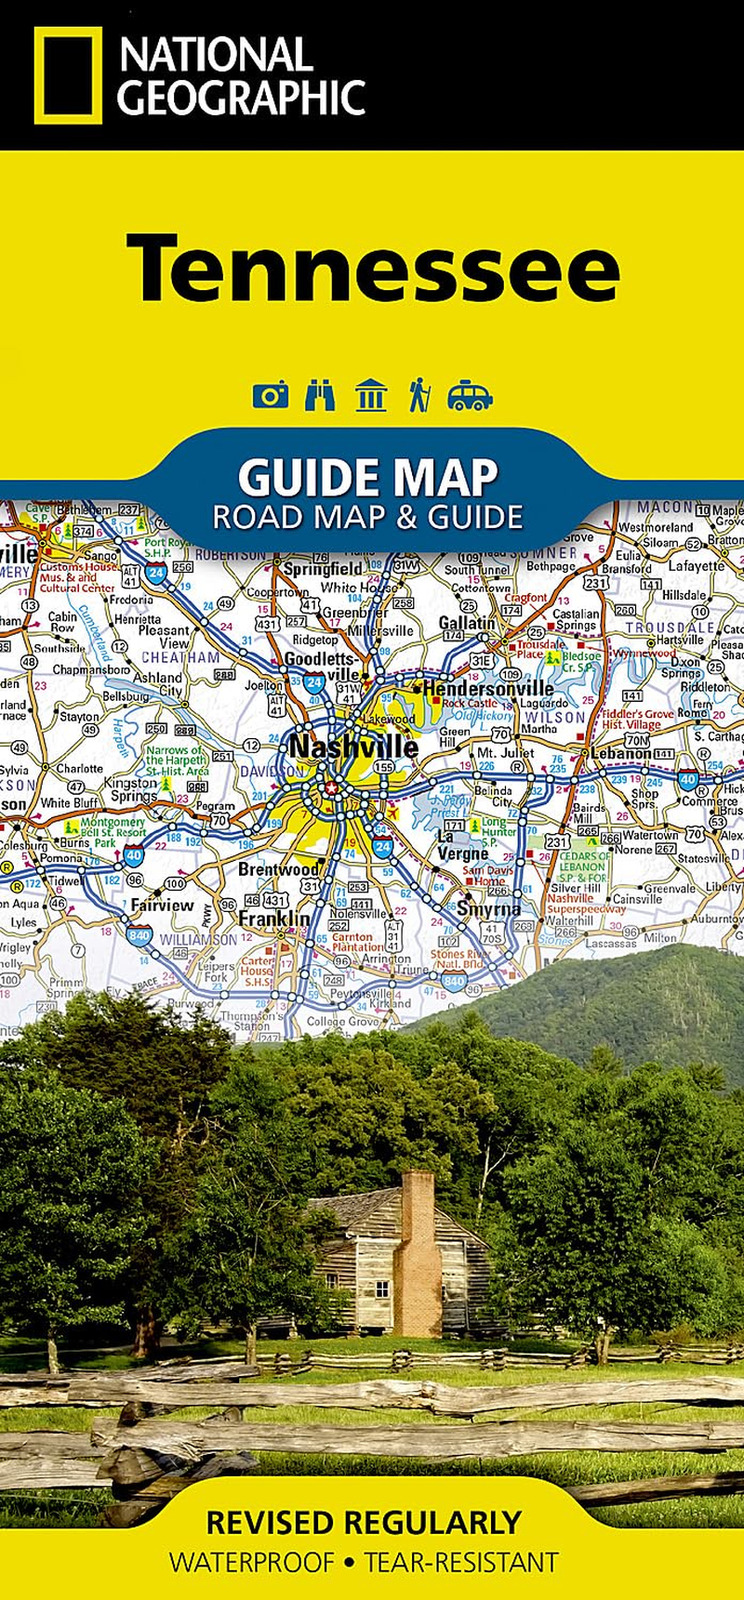 Tennessee Map (National Geographic Guide Map) - NEW